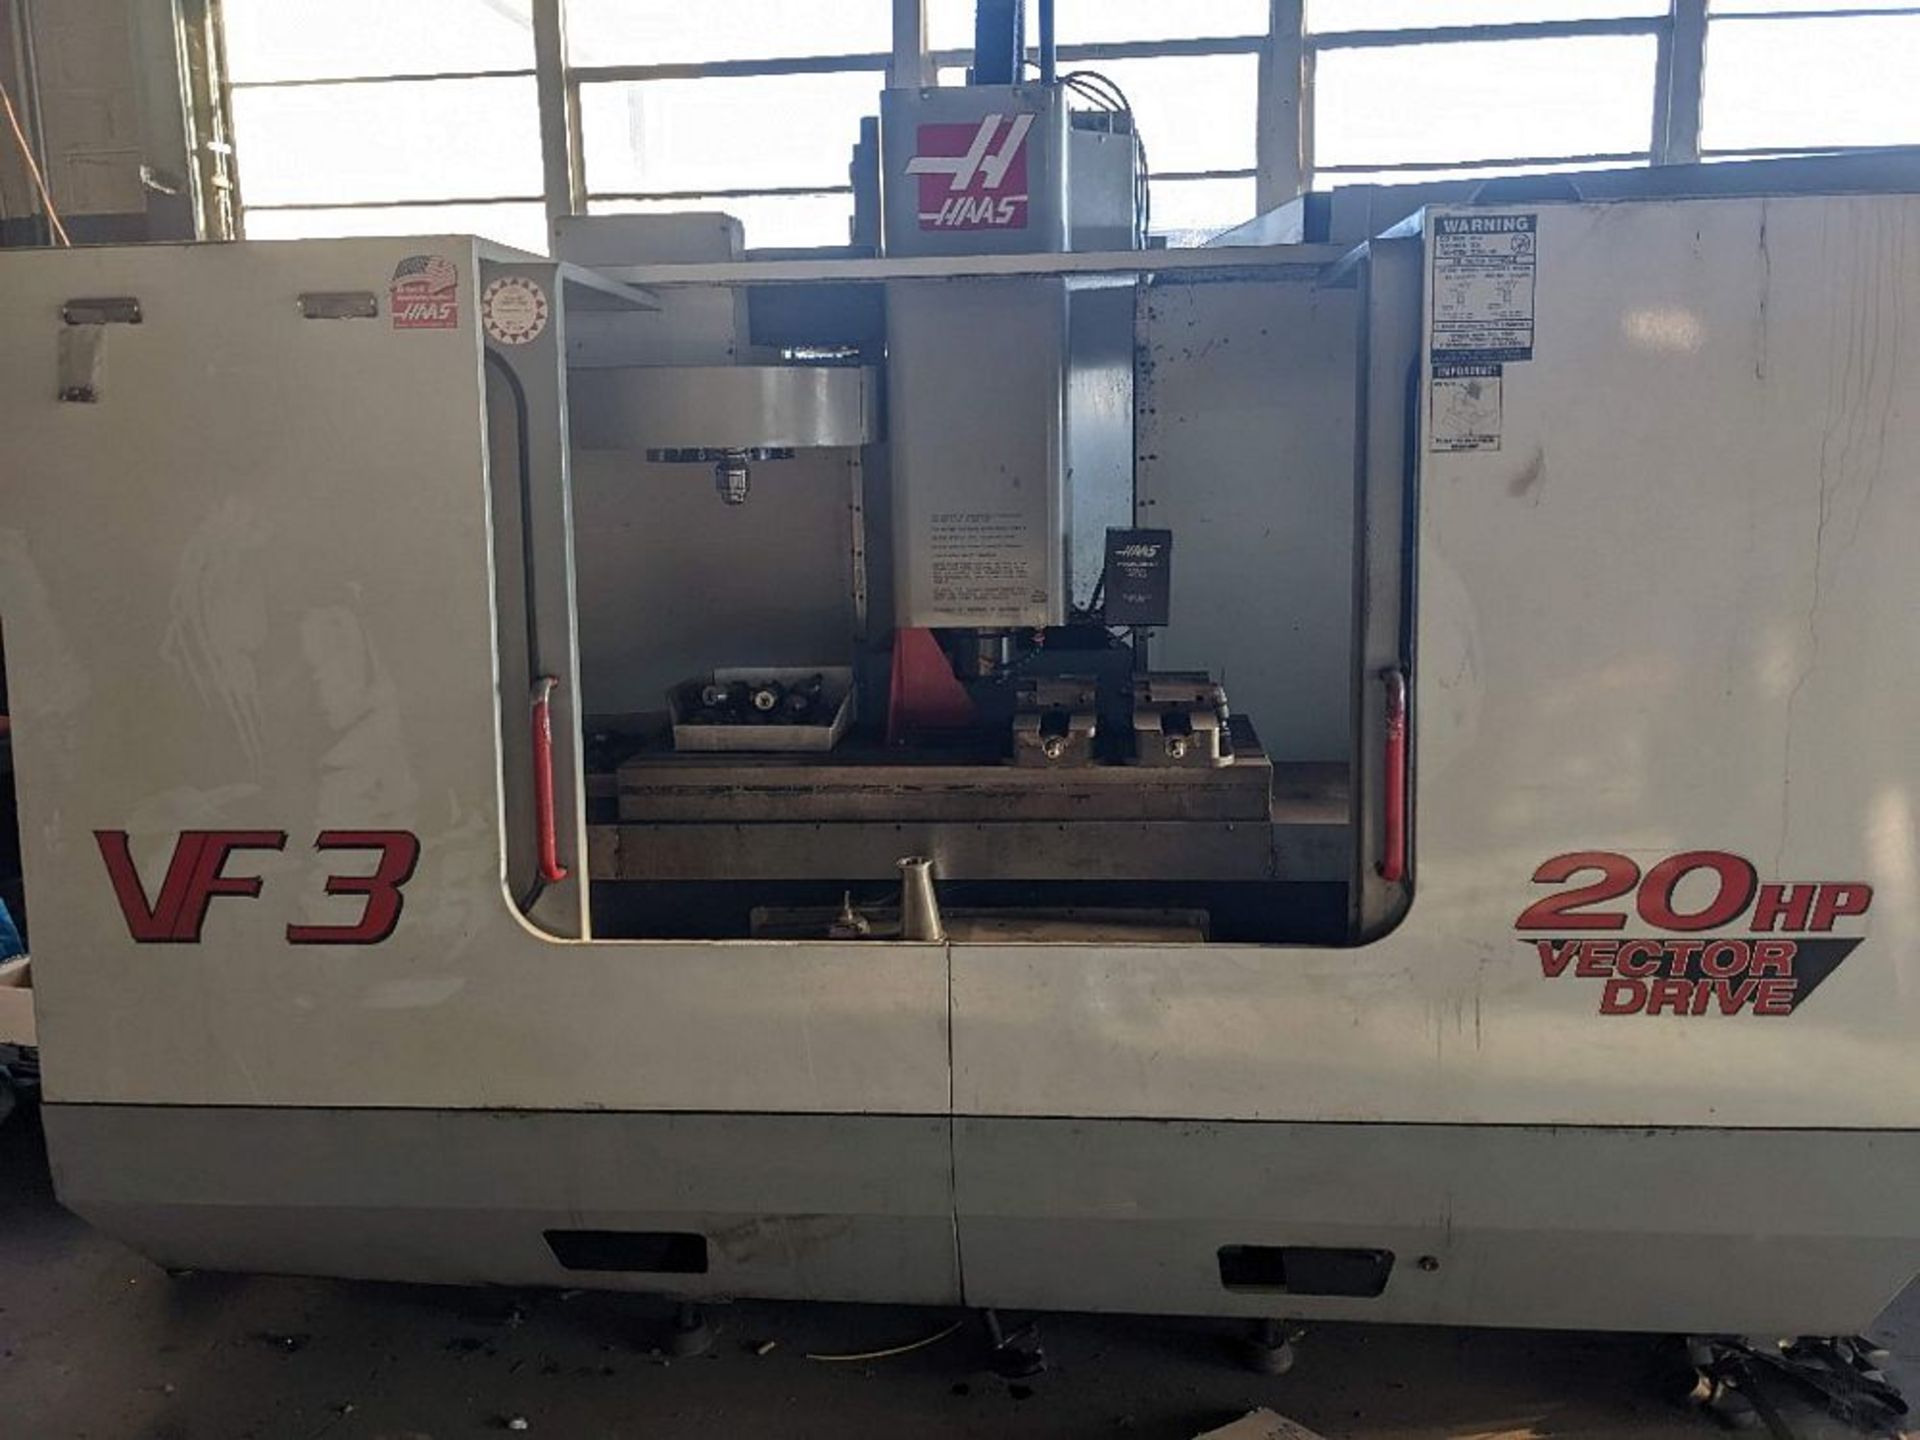 Haas VFS CNC Mill - X Axis Travel: 40" - Y Axis Travel: 20" - Z Axis Travel: 25" - Rapid Rate X - Image 2 of 12